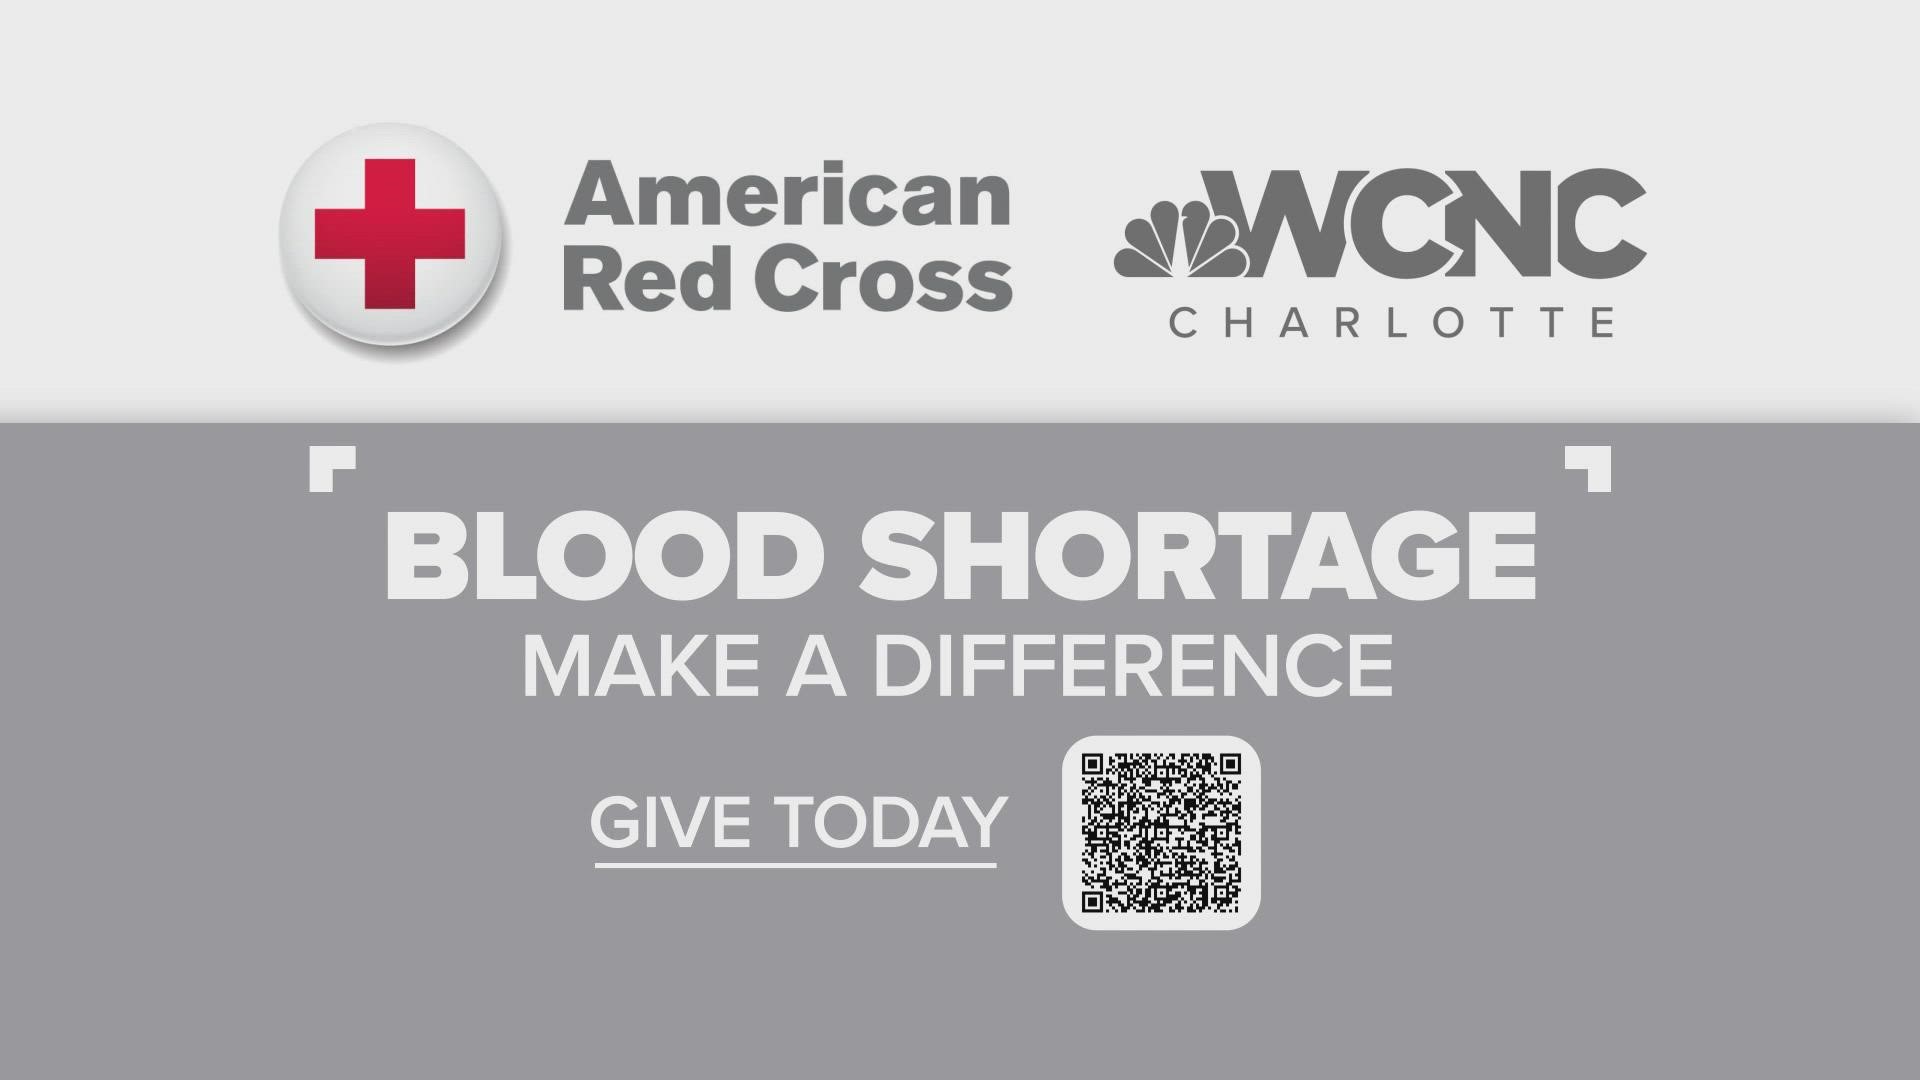 WCNC Charlotte is teaming up with the Red Cross for a blood drive telethon.